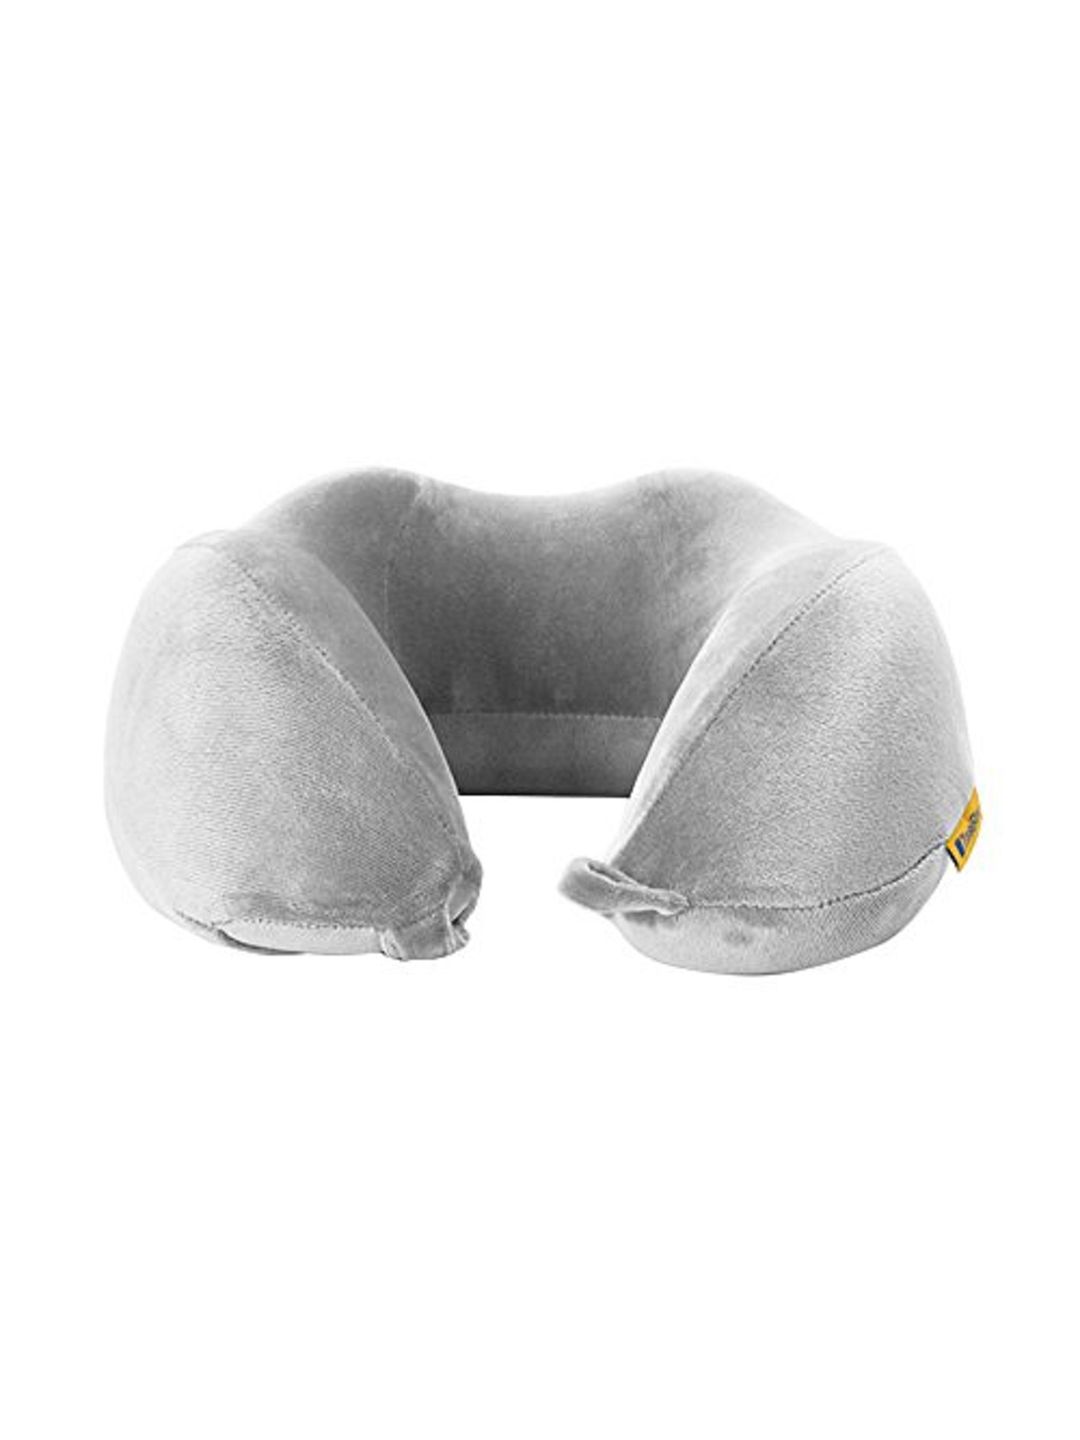 Travel Blue Grey Solid Tranquility Memory Foam Foldable Travel Pillow Price in India